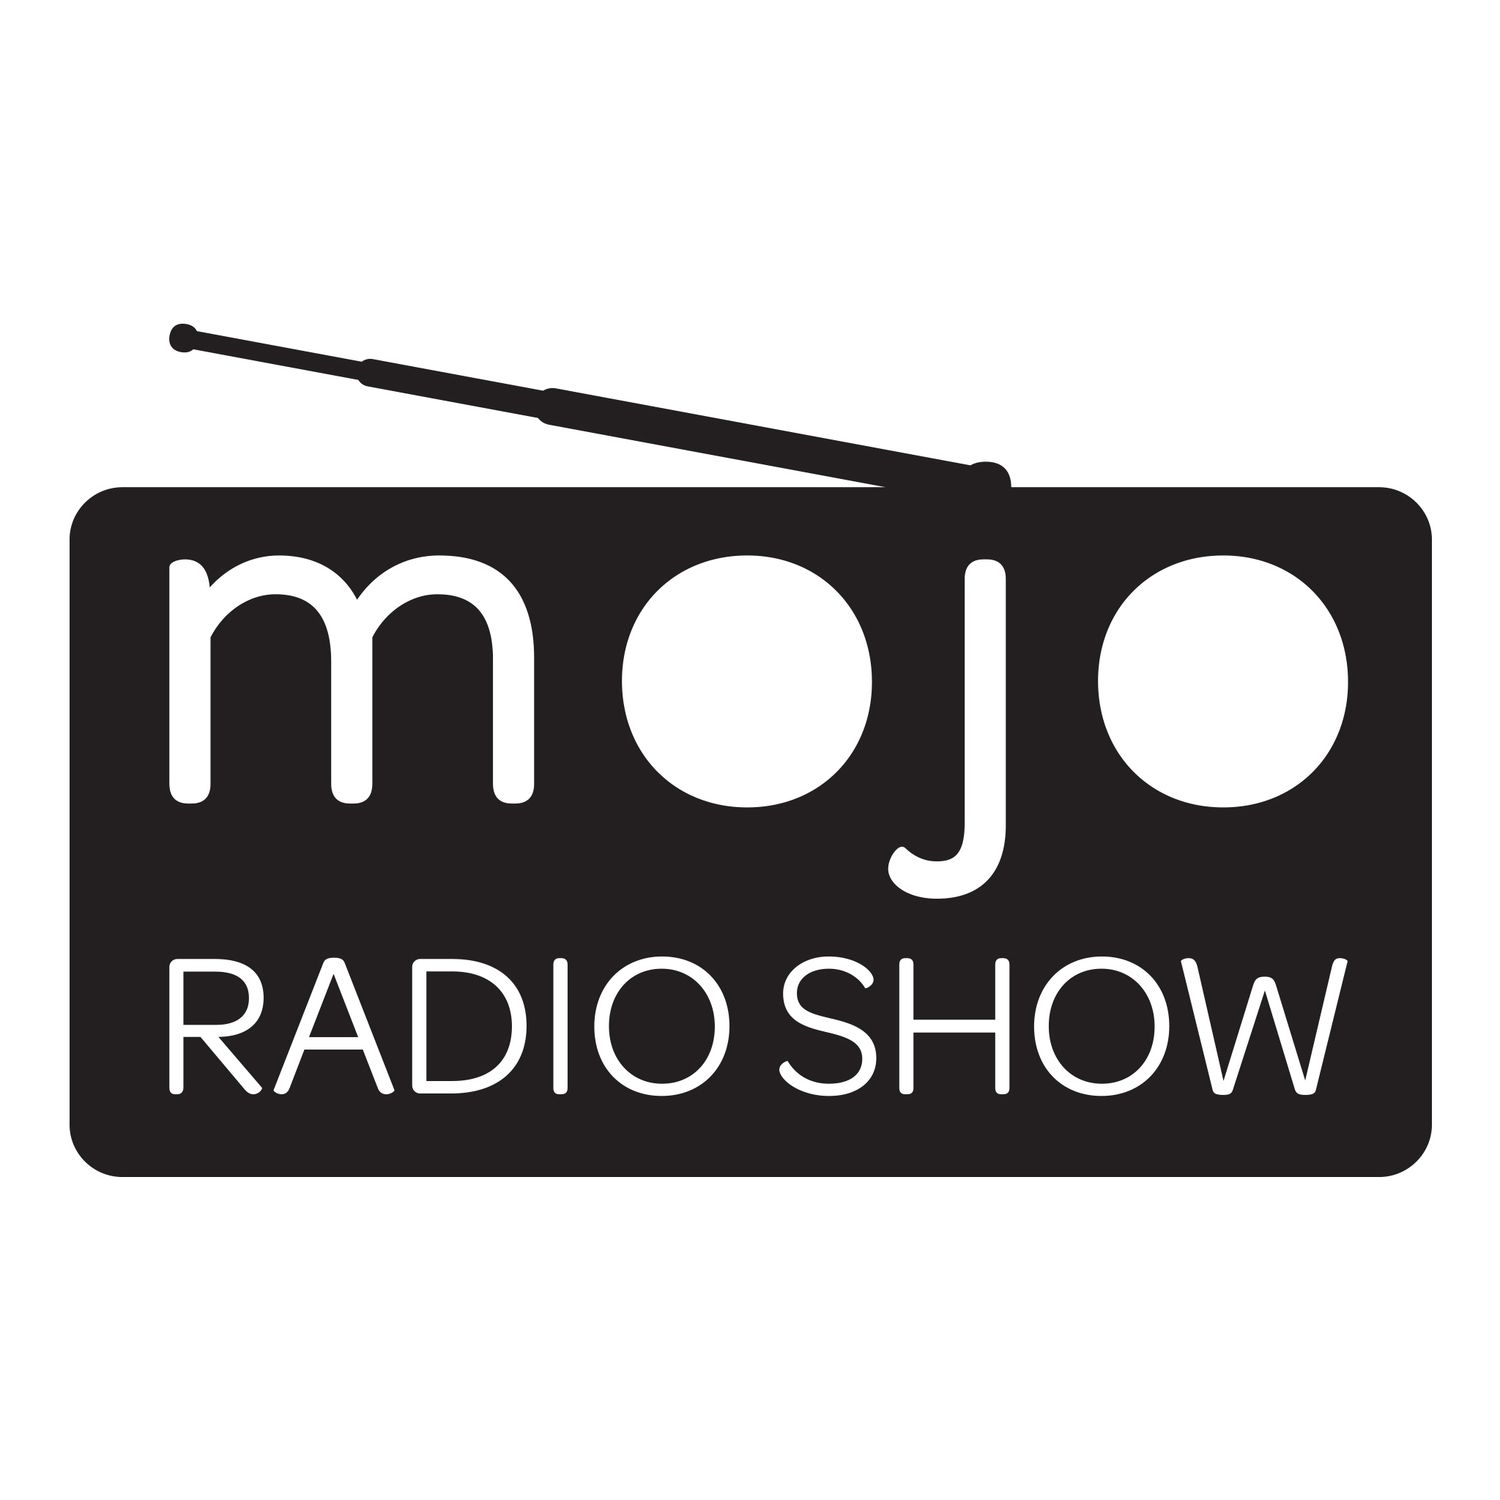 The Mojo Radio Show EP 145: Finding Peace in an Out of Control, Distracted and Overly Busy World - Jaimal Yogis